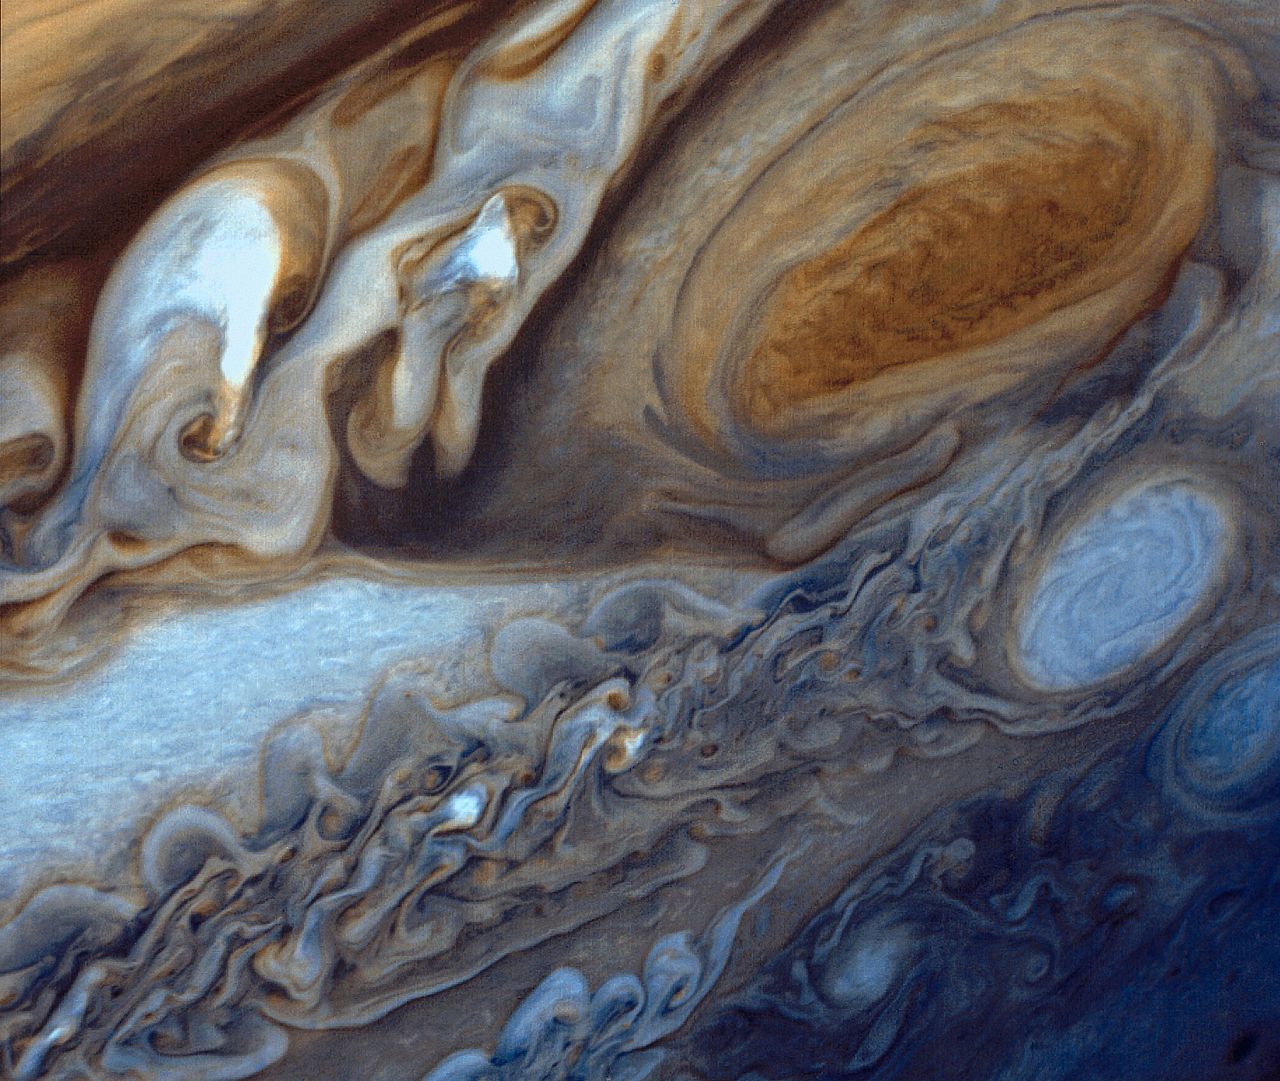 Image of Jupiter’s Great Red Spot with turbulent cloud tops.